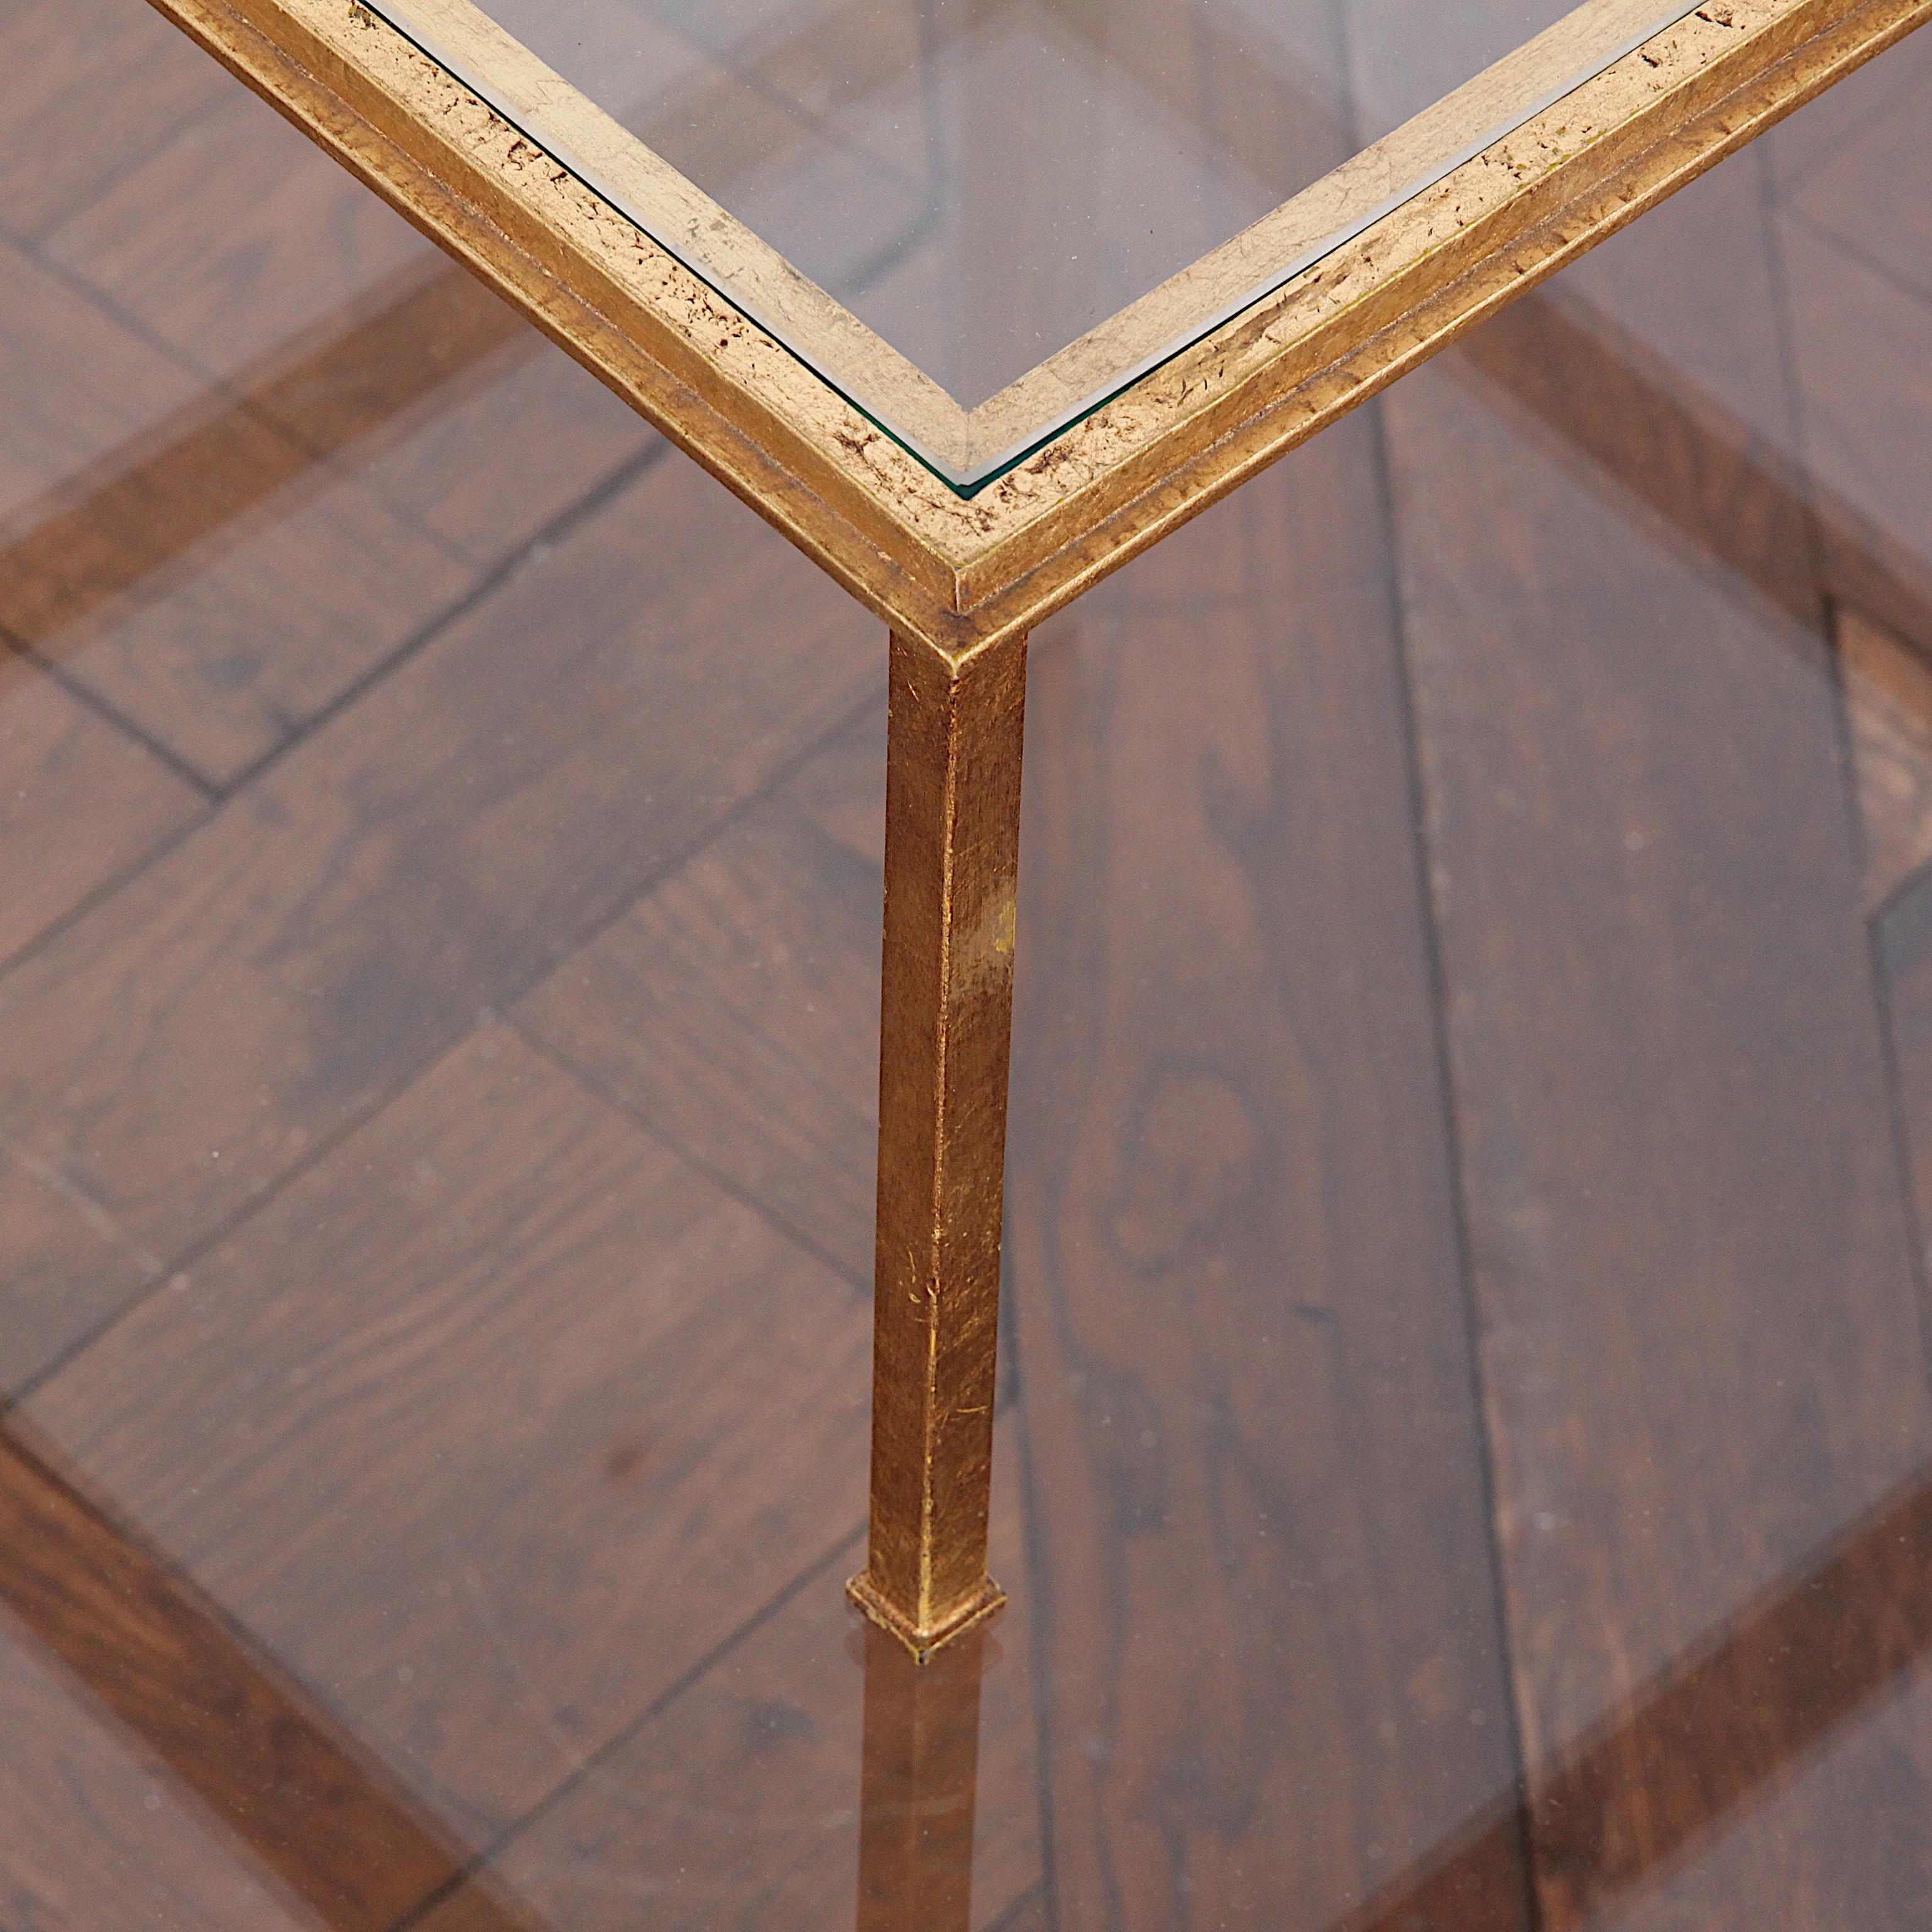 Gold gilded bronze Mid-Century Modern side table (two levels) from Paris. By notable French designer Roger Thibier of the era. Beautiful condition.